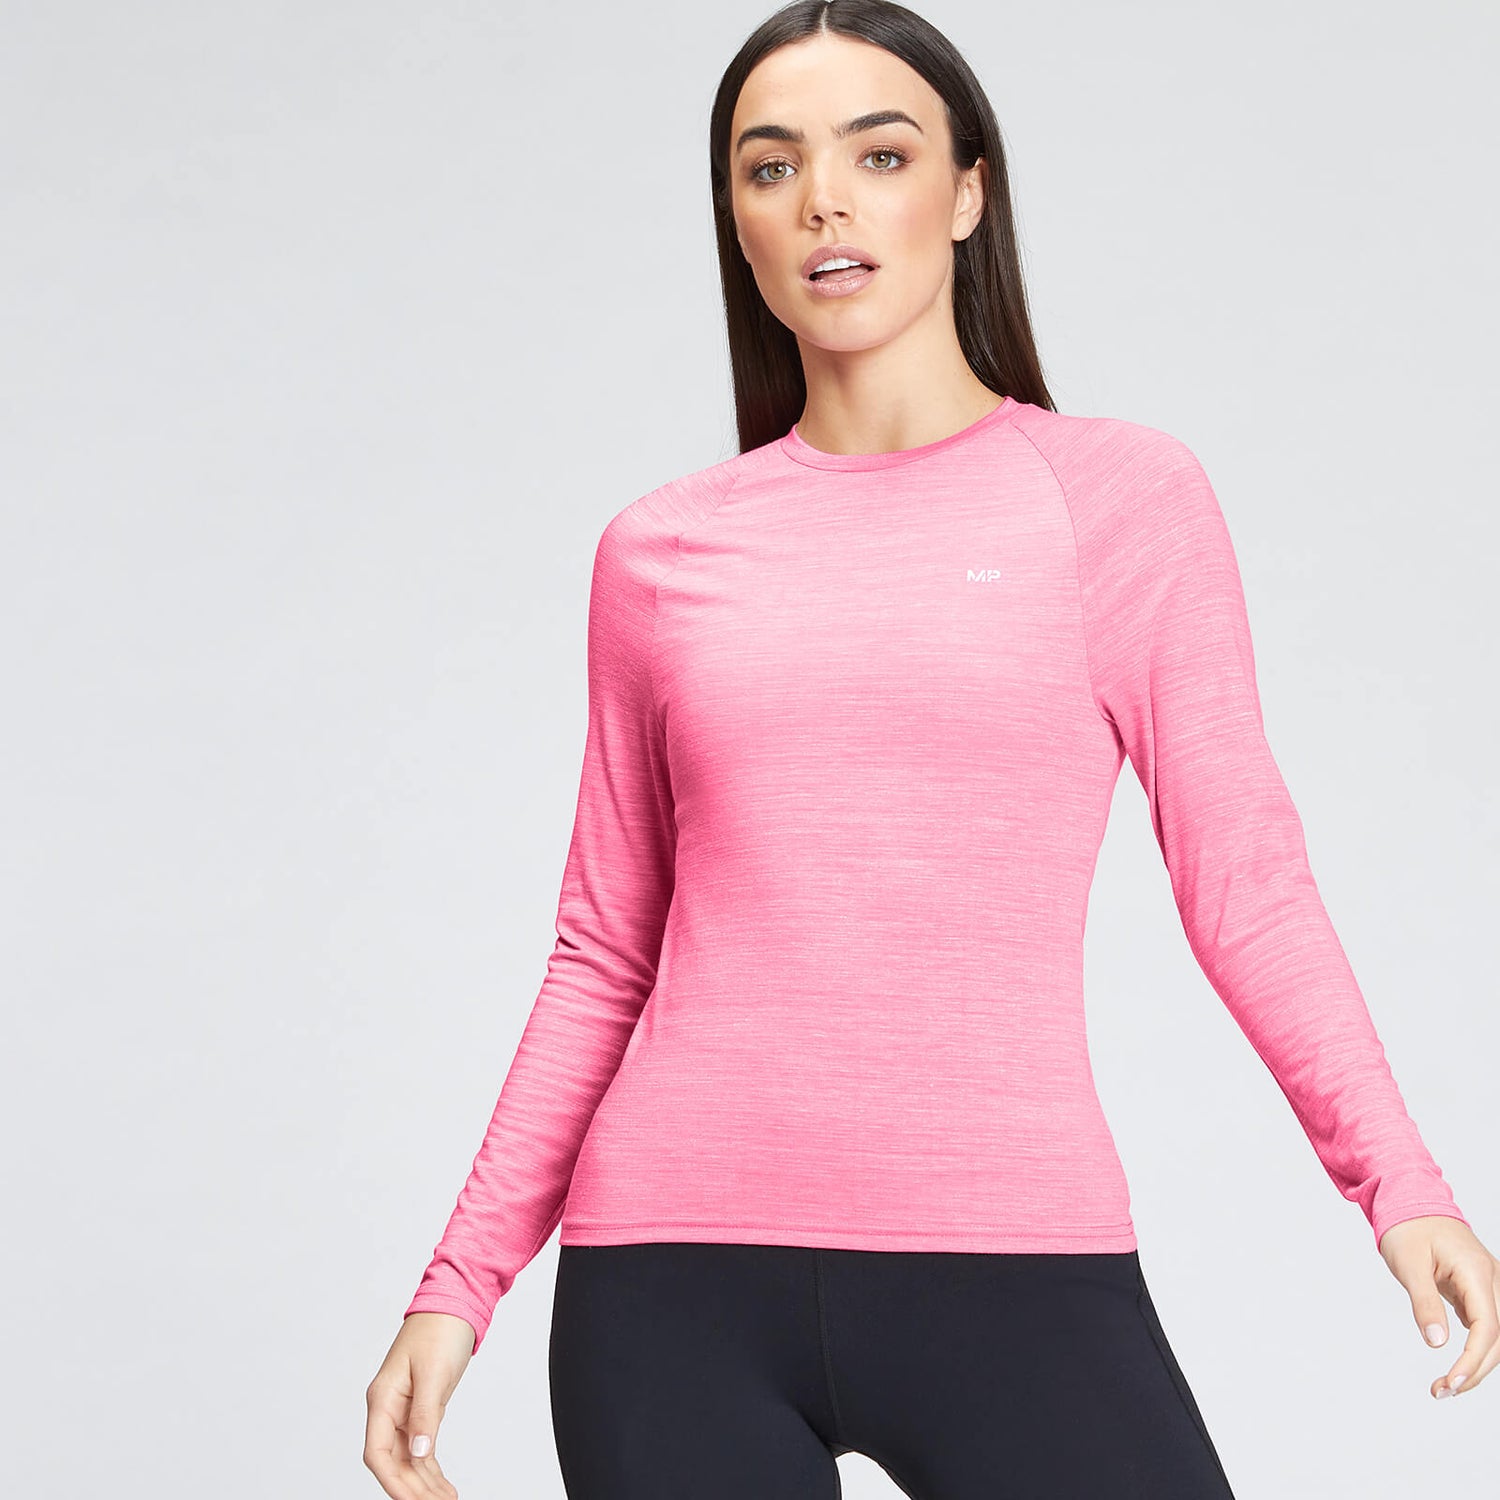 MP Women's Performance Long Sleeve Training T-Shirt - Candyfloss Marl with White Fleck - XS